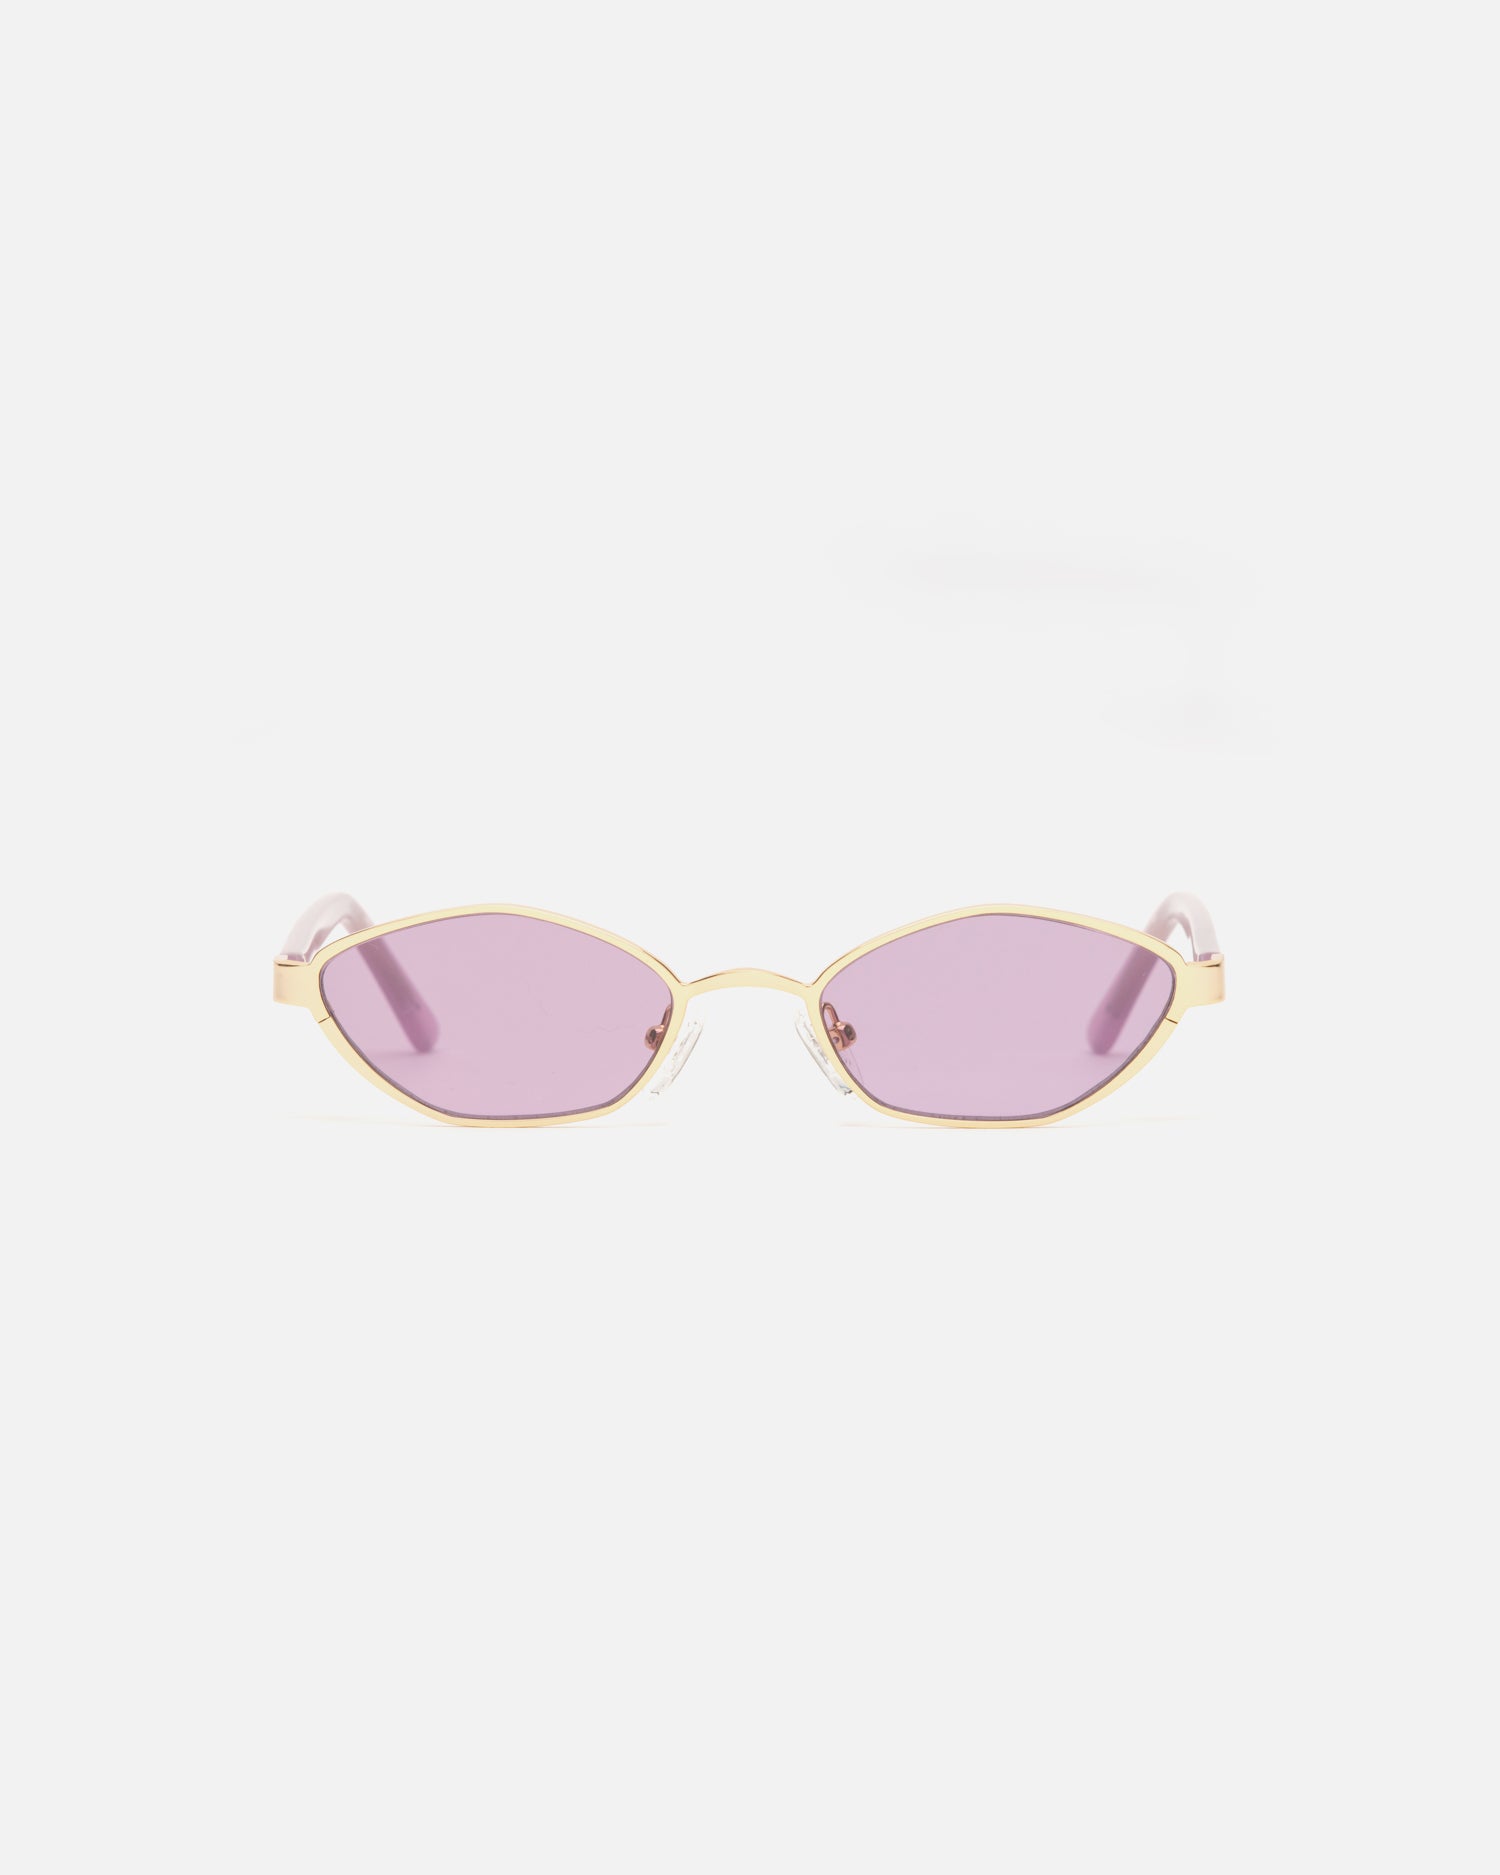 Lu Goldie Farrah Gold Wire Frame Round Sunglasses in Lilac purple, front image